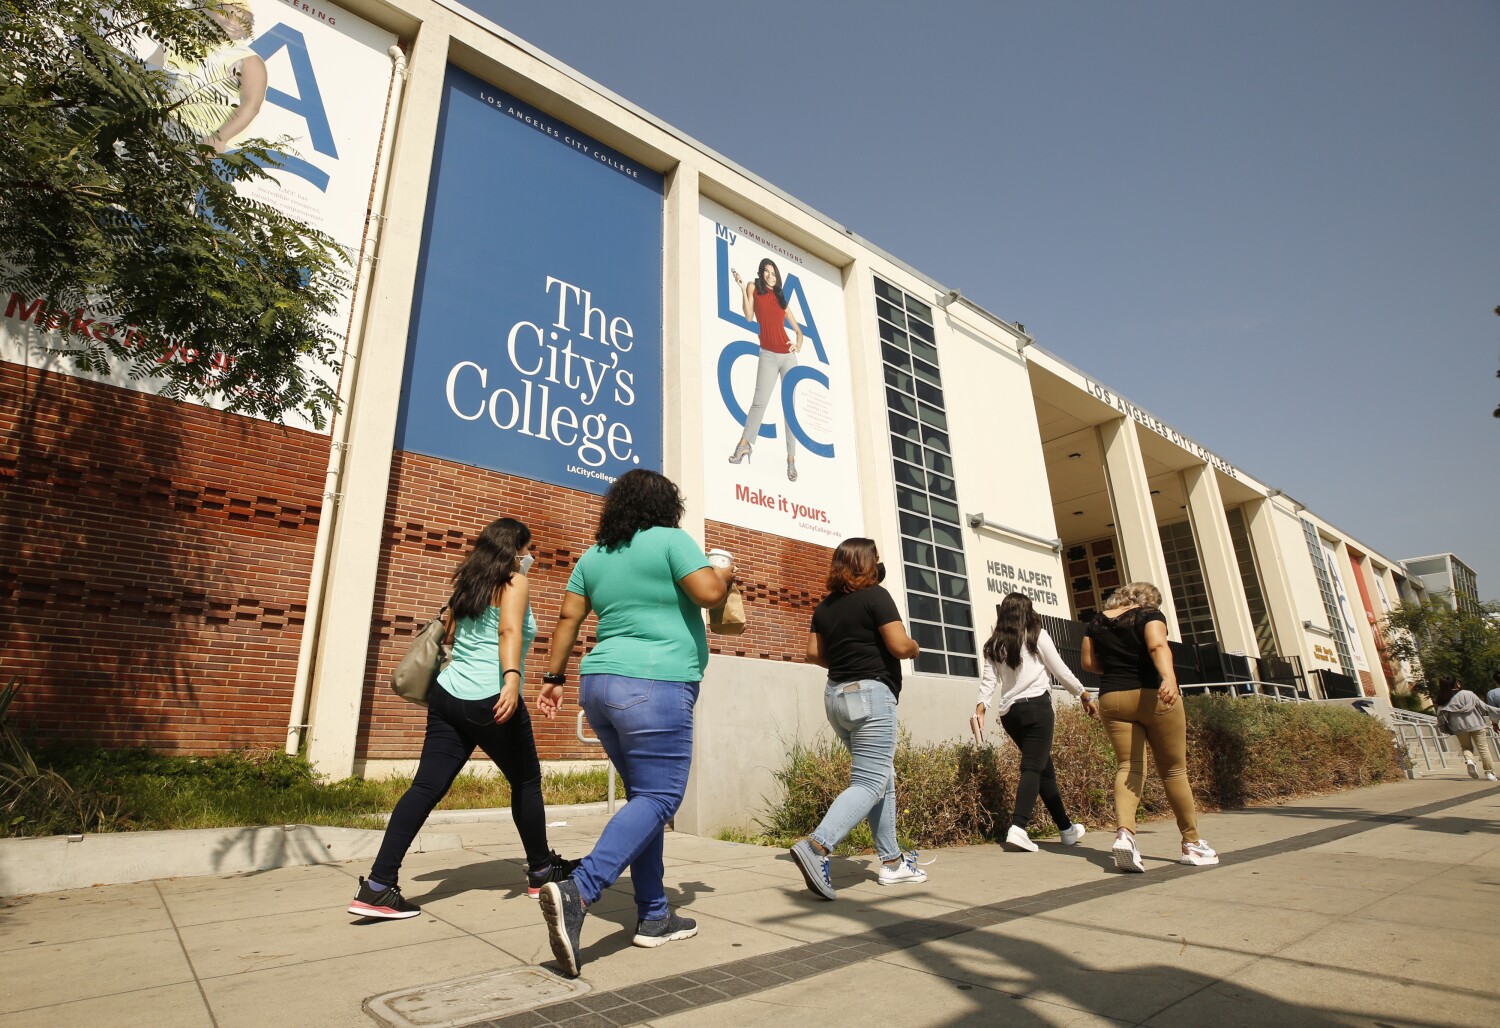 California community college students choosing jobs over class likely fuel enrollment drop